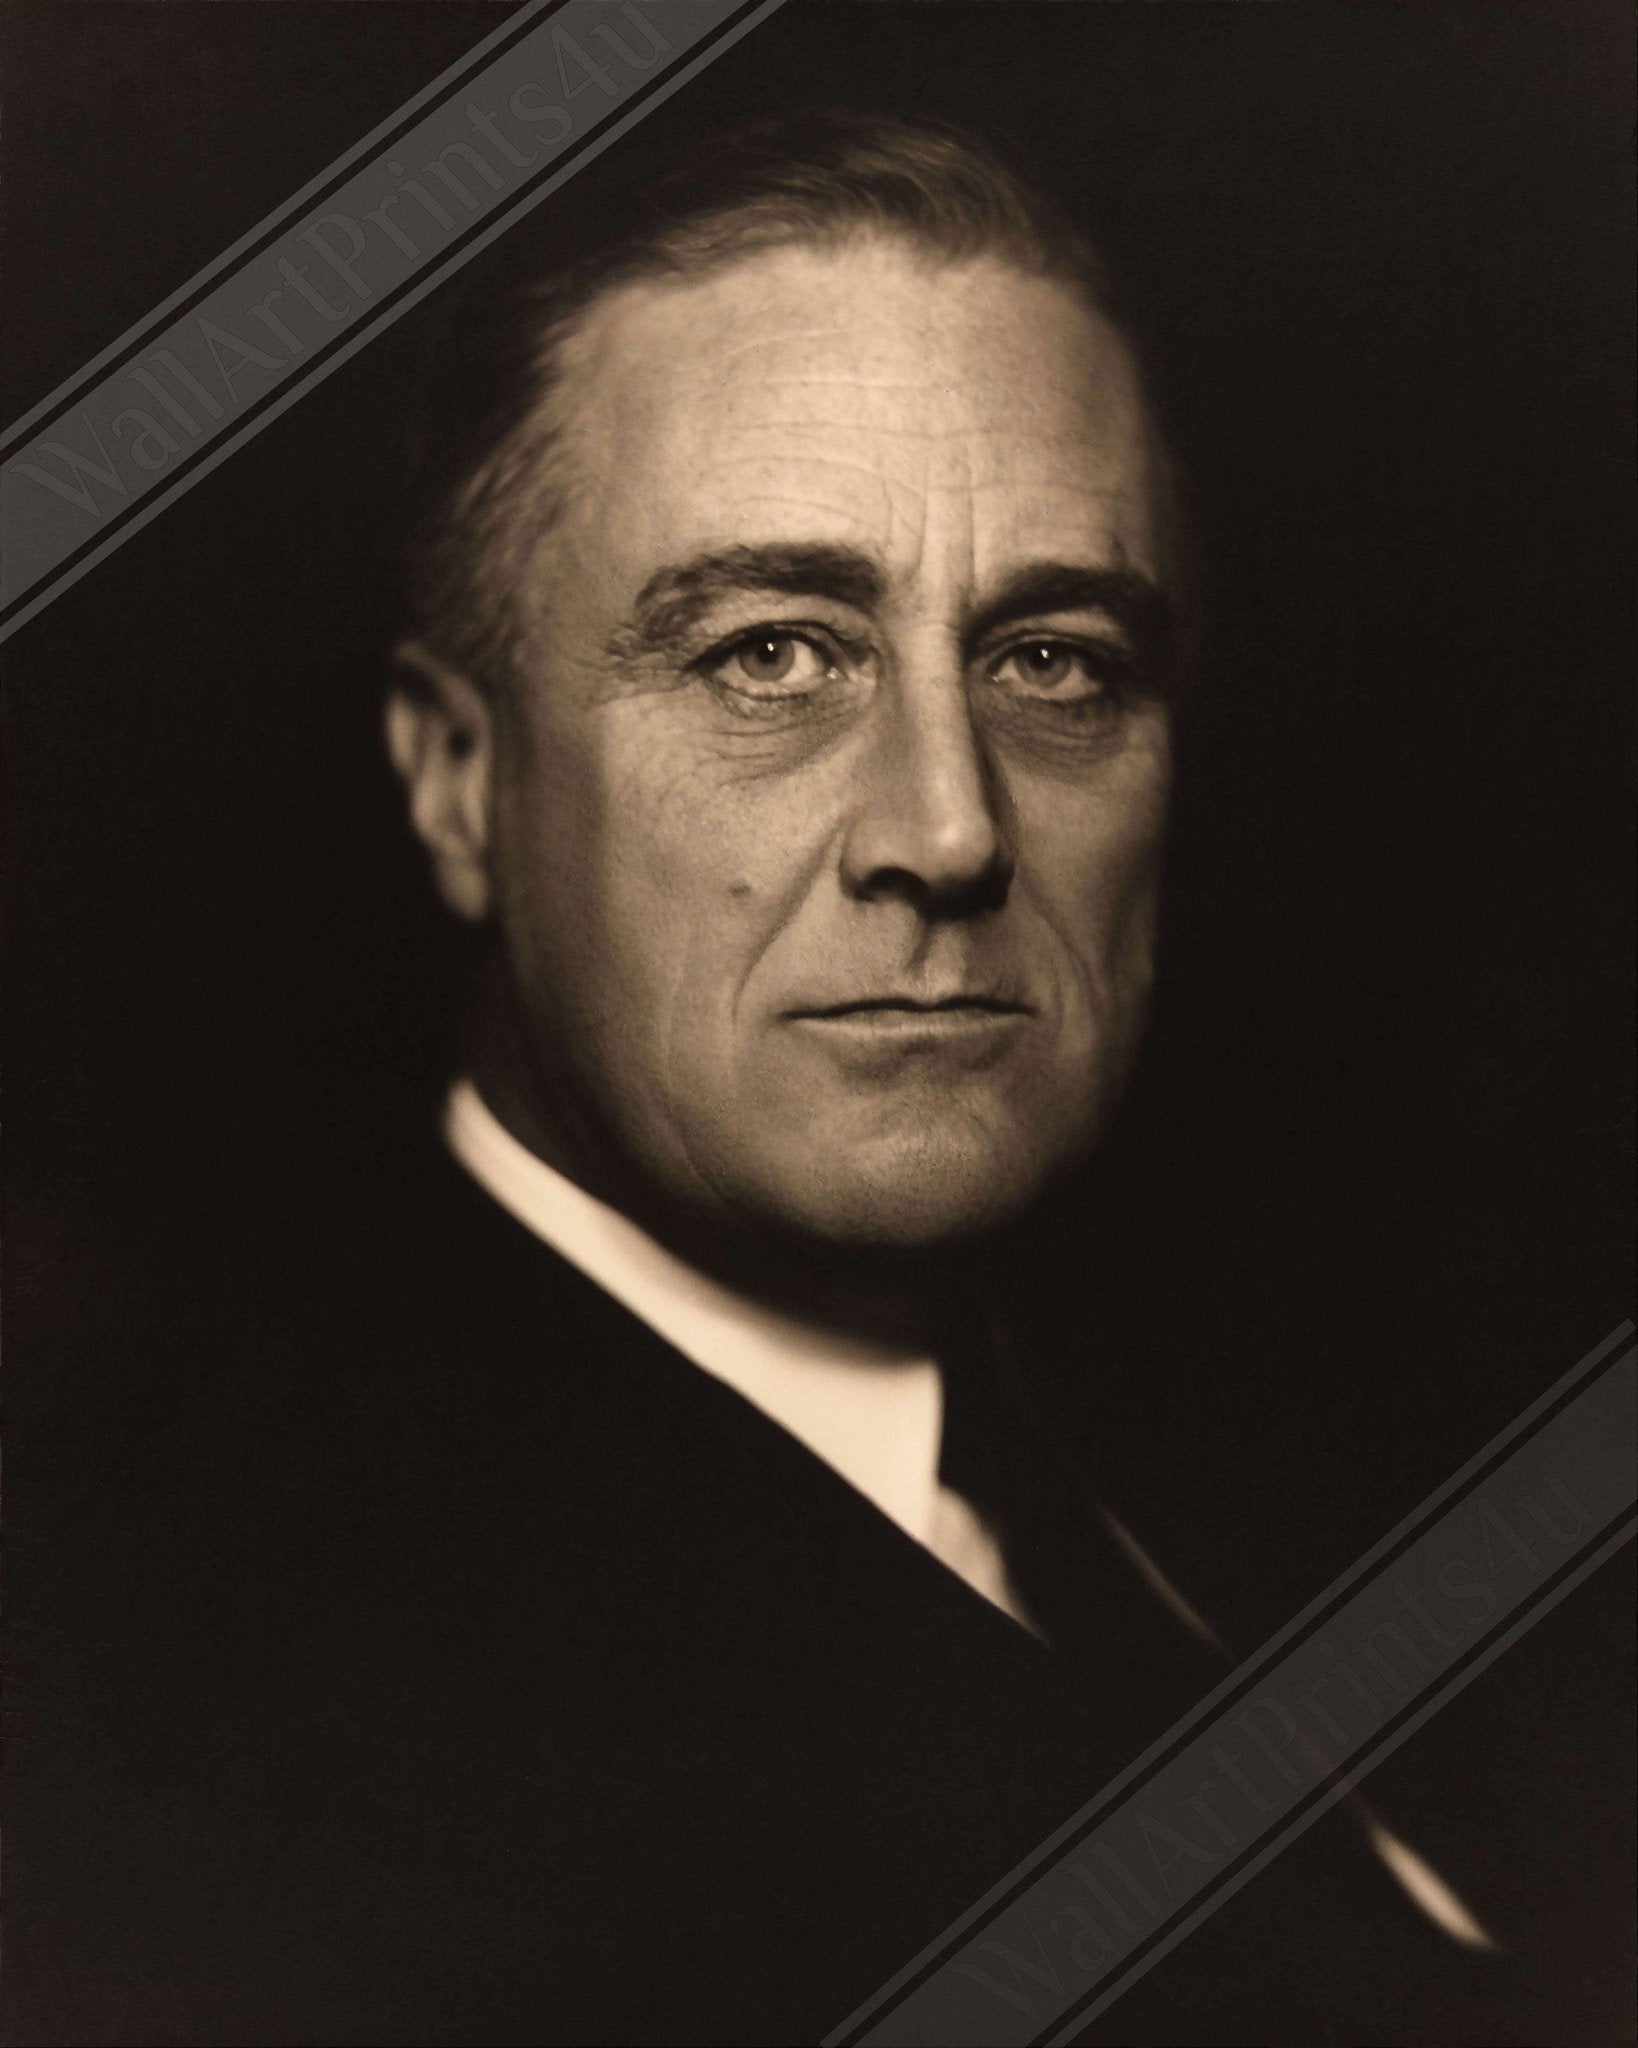 Fdr Poster, Greatest American President Of The 20th Century, Vintage Photo - Iconic Fdr Print - 32nd Potus - WallArtPrints4U